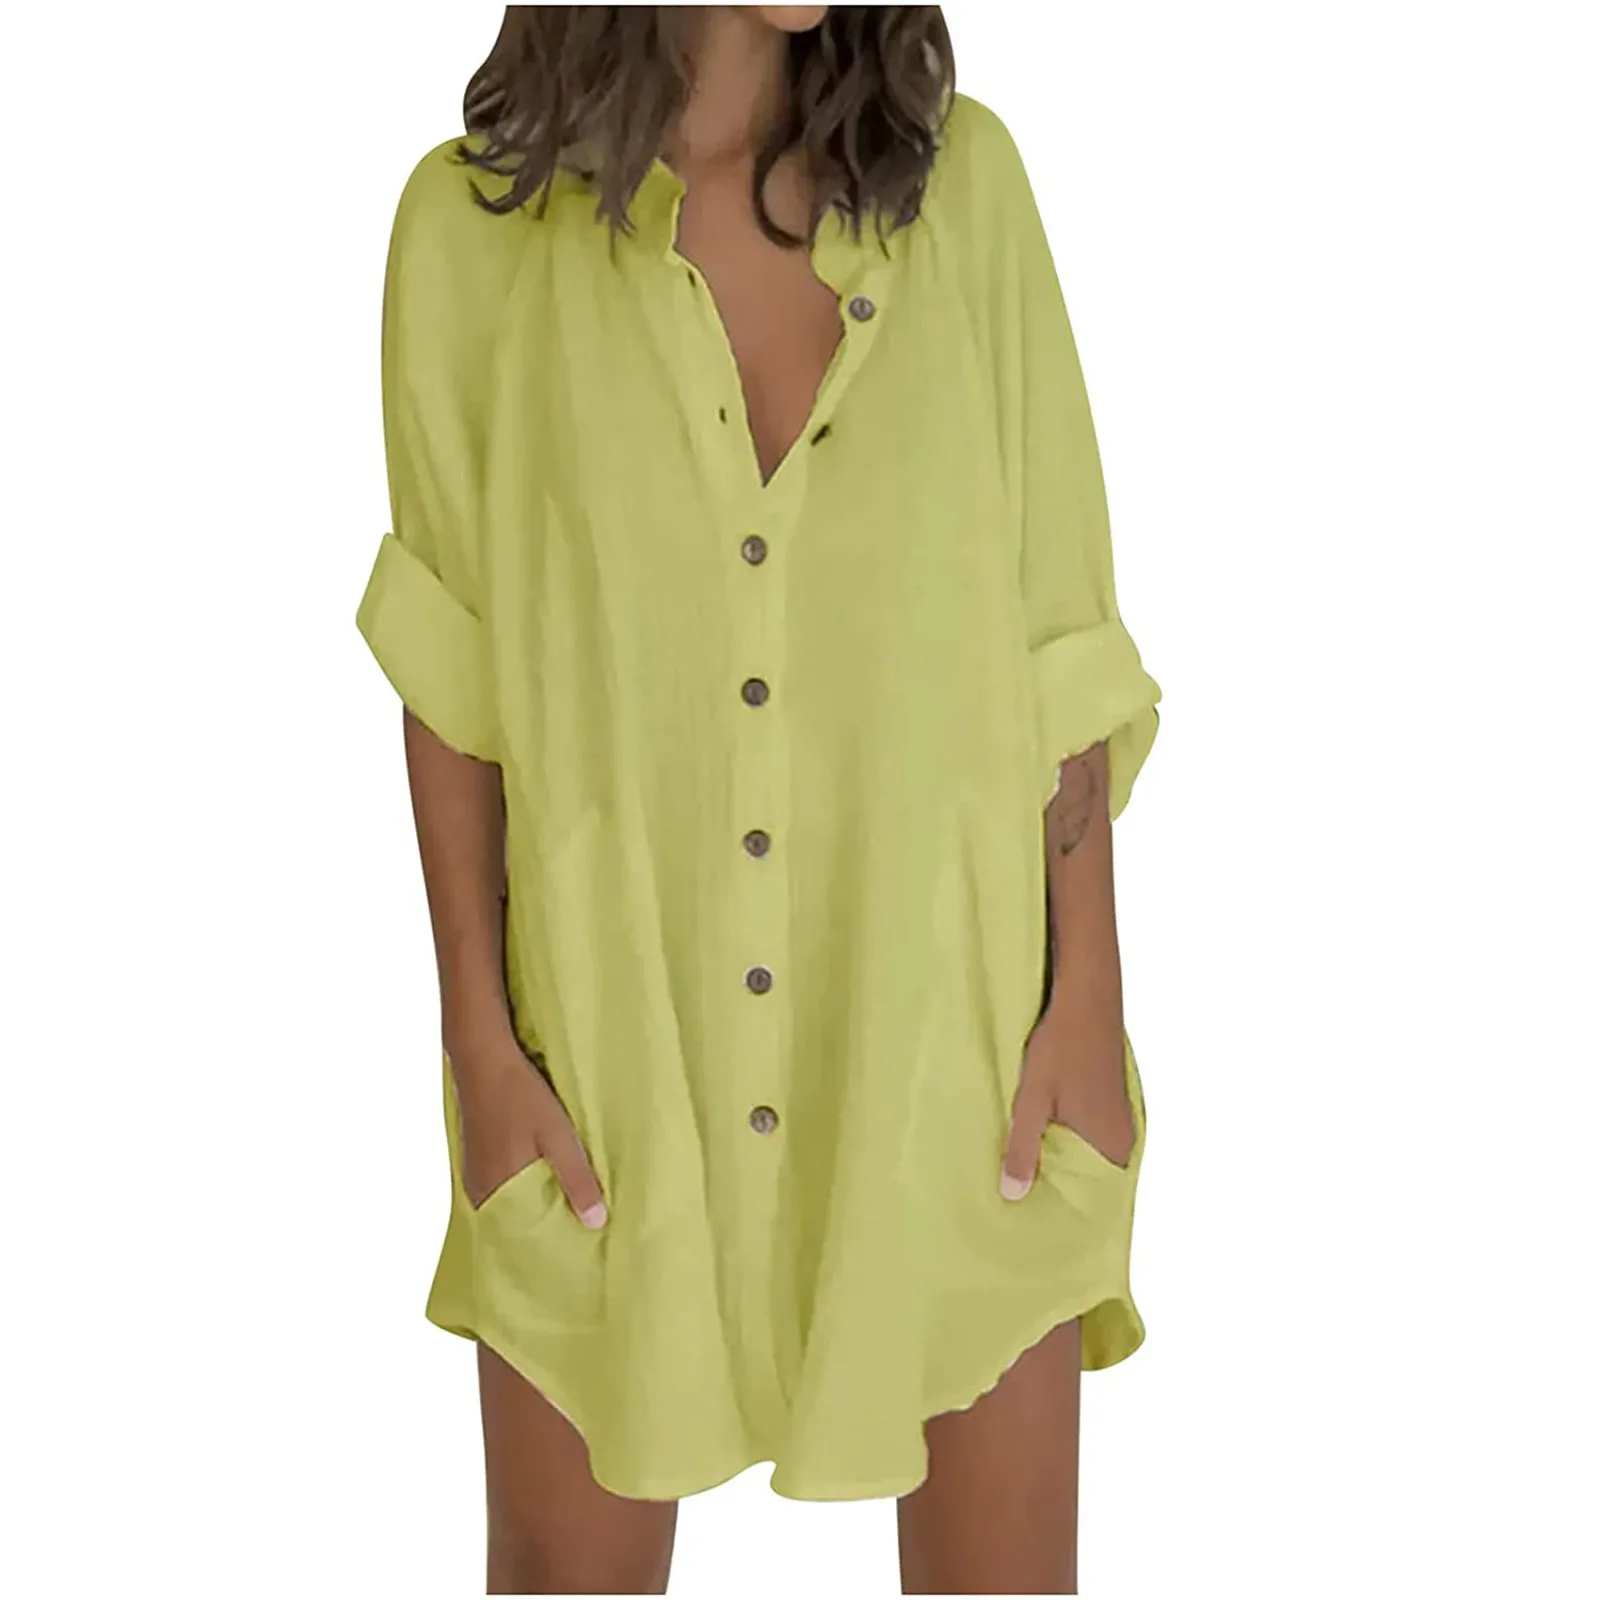 Cotton Linen Shirt Dress Women High Street Wear Button Down Blouse Long Tunic Dress Plus Size Blouse With Pocket Cover-up bathing suit and cover up set